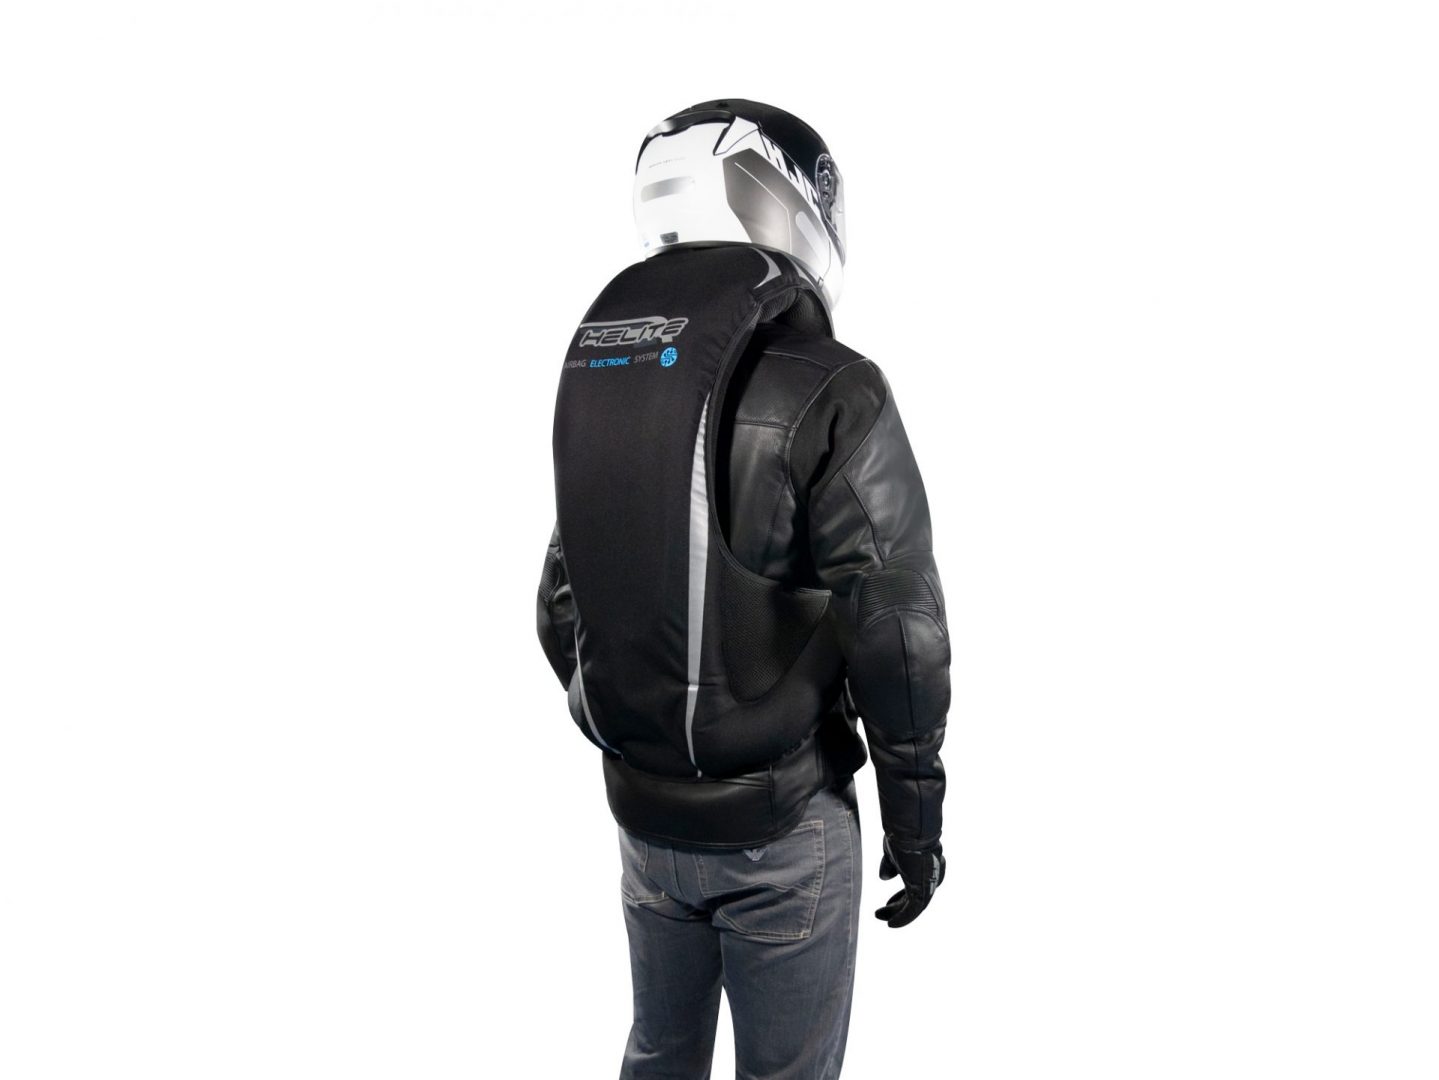 Helite e-Turtle Black Motorcycle Vest inflated back view